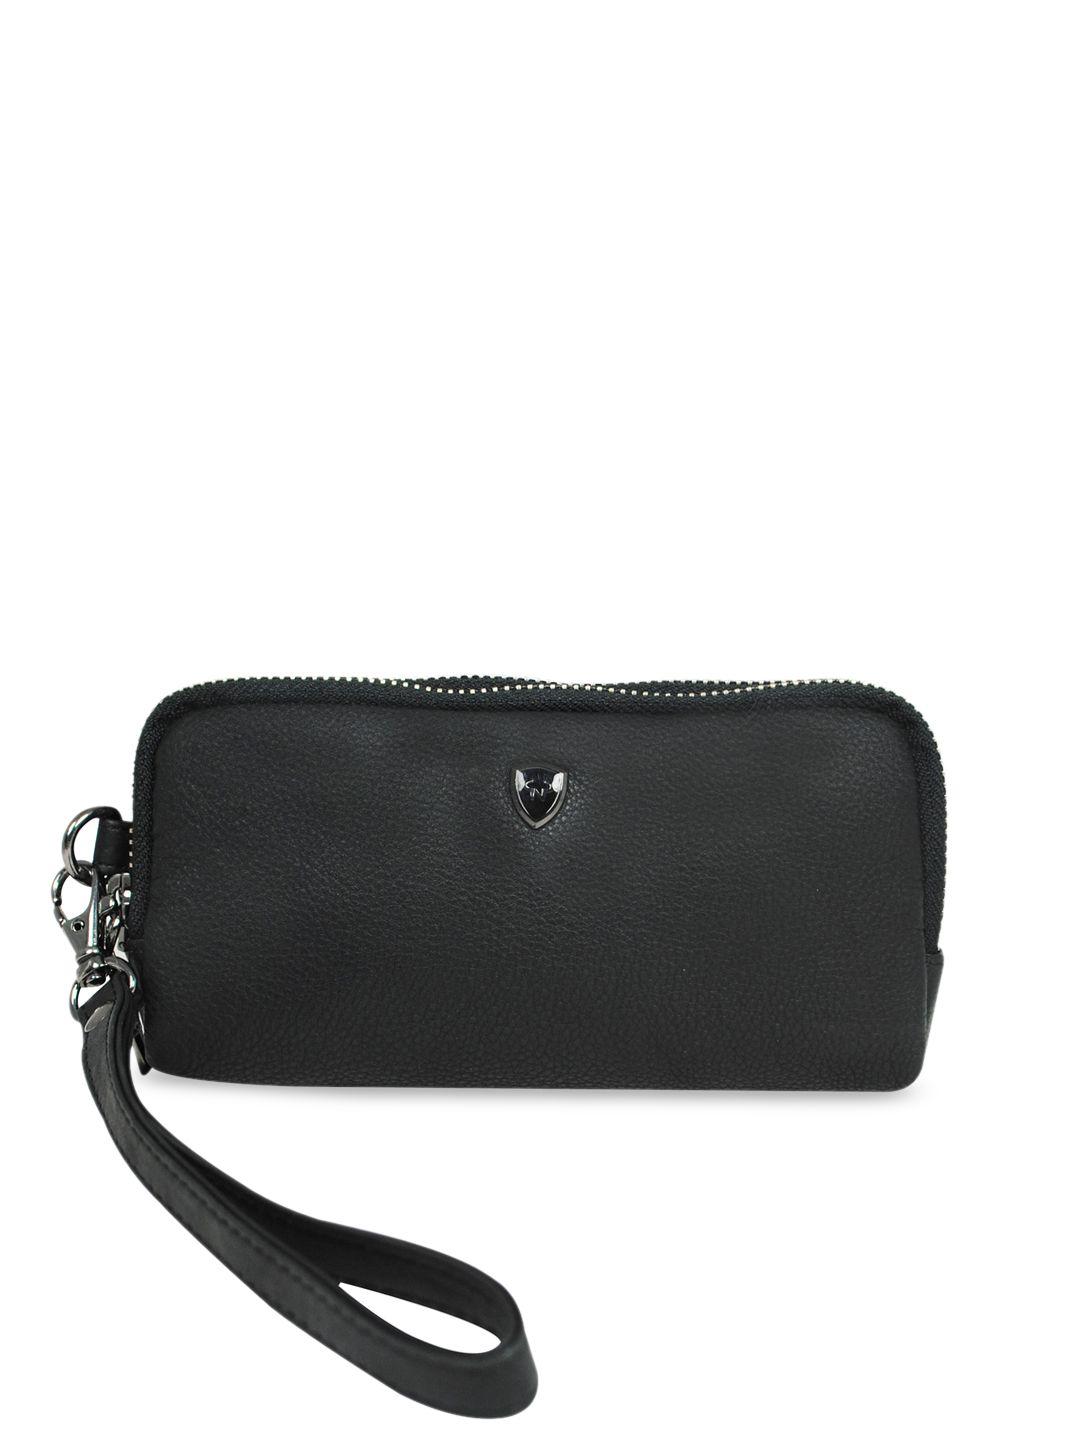 calfnero black solid leather travel pouch